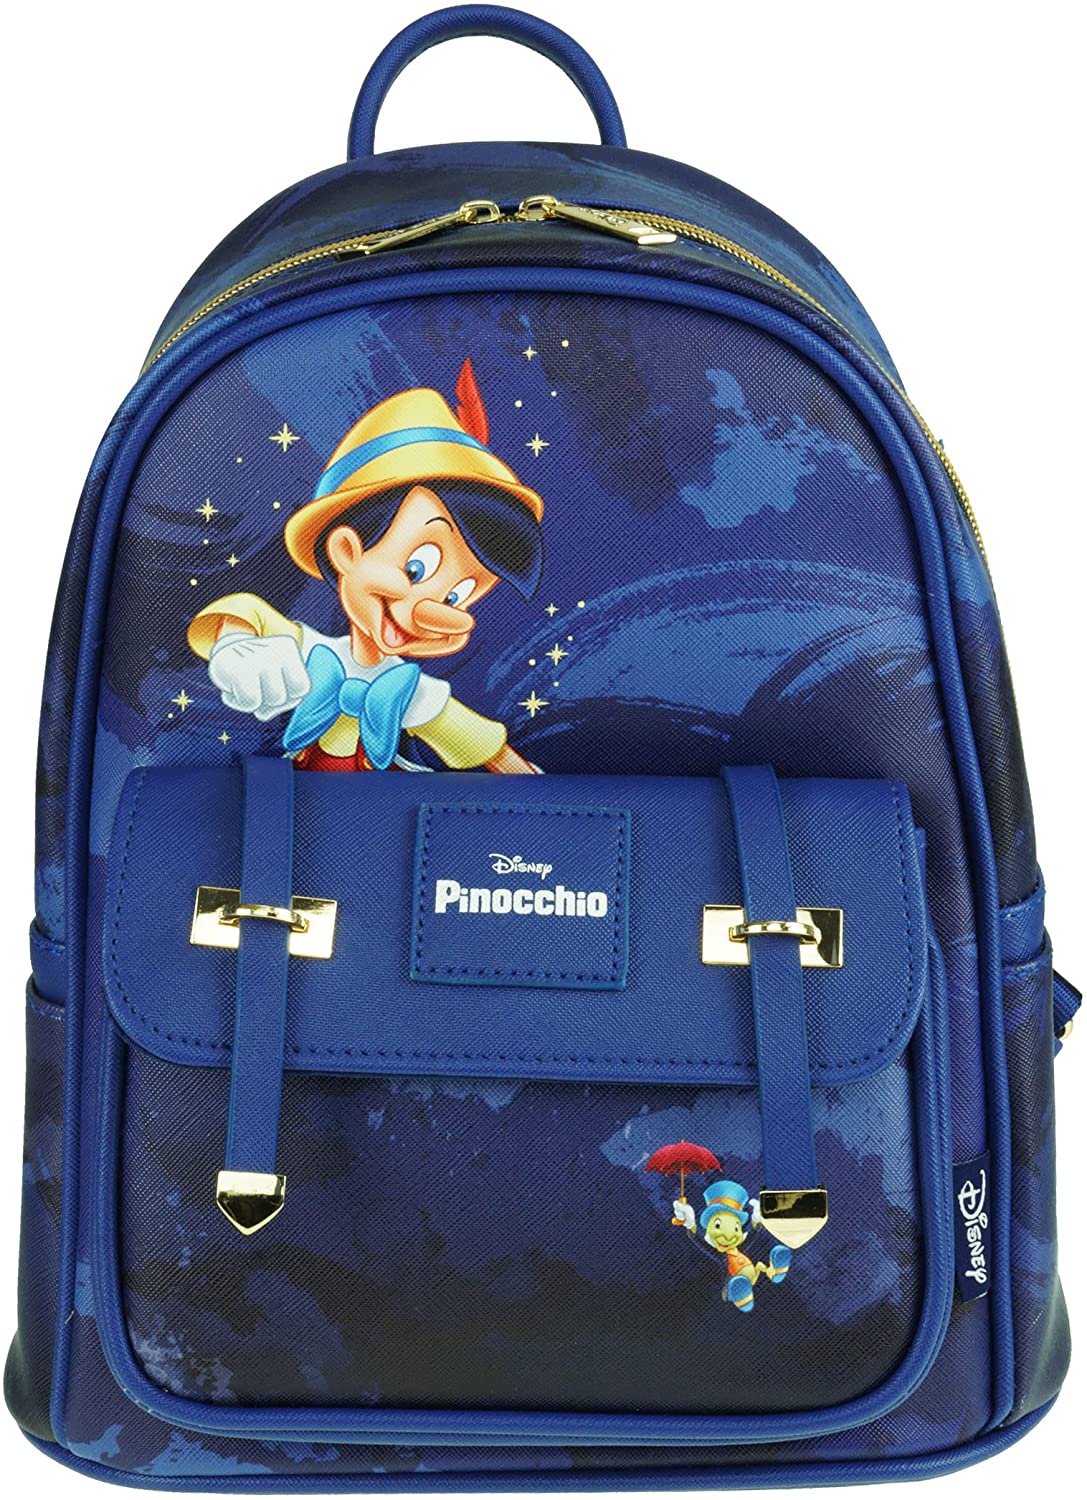 Pinocchio 11" Vegan Leather Mini Backpack - A21832 - GTE Zone